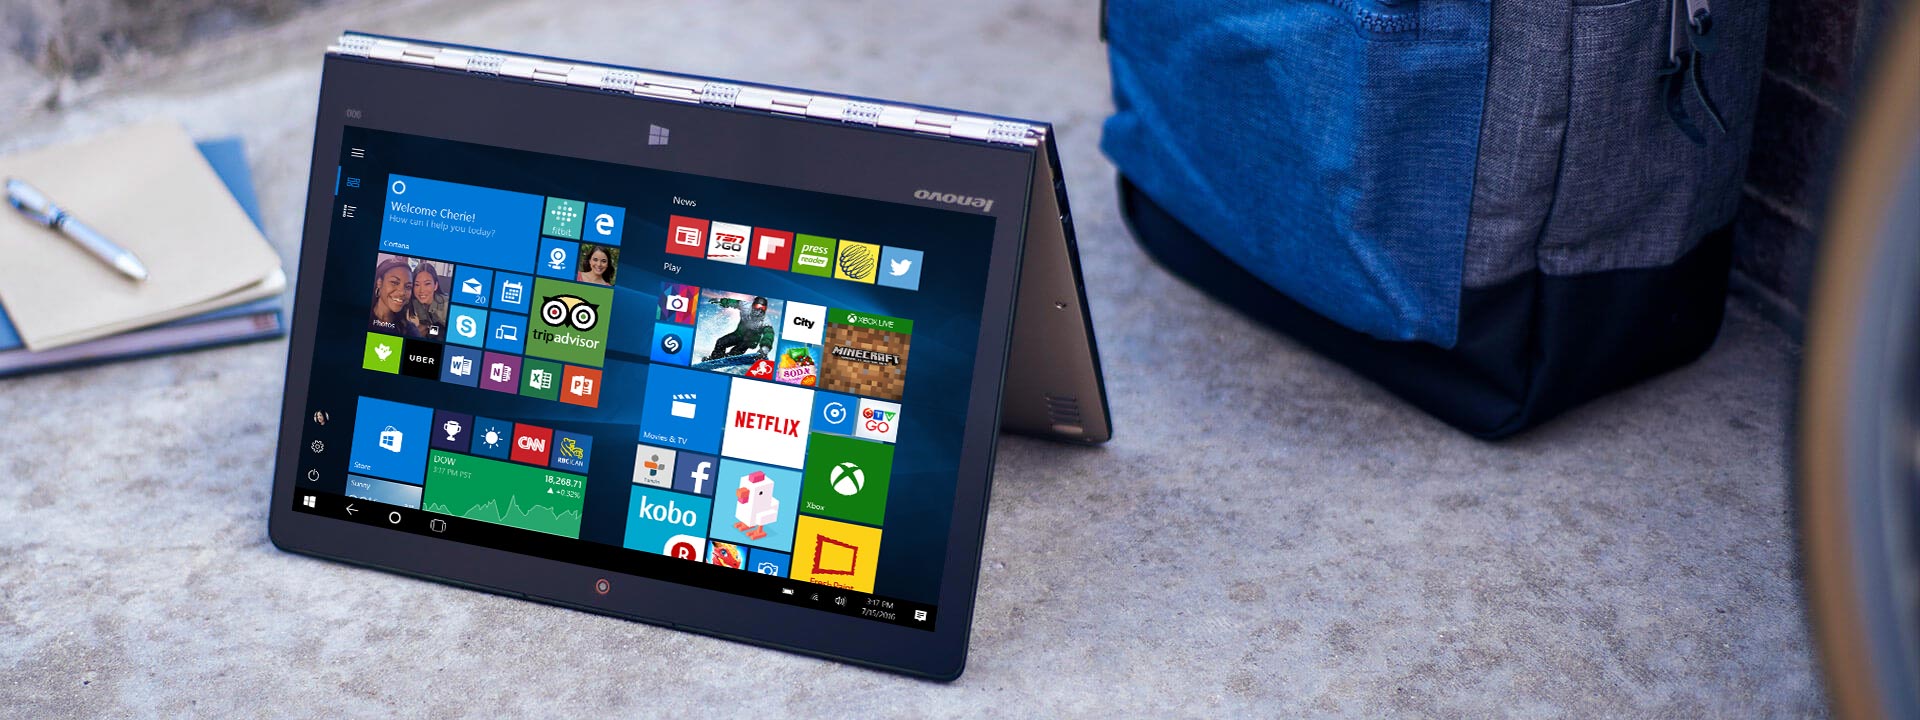 Lenovo Yoga 900 in tent mode with Windows 10 start screen